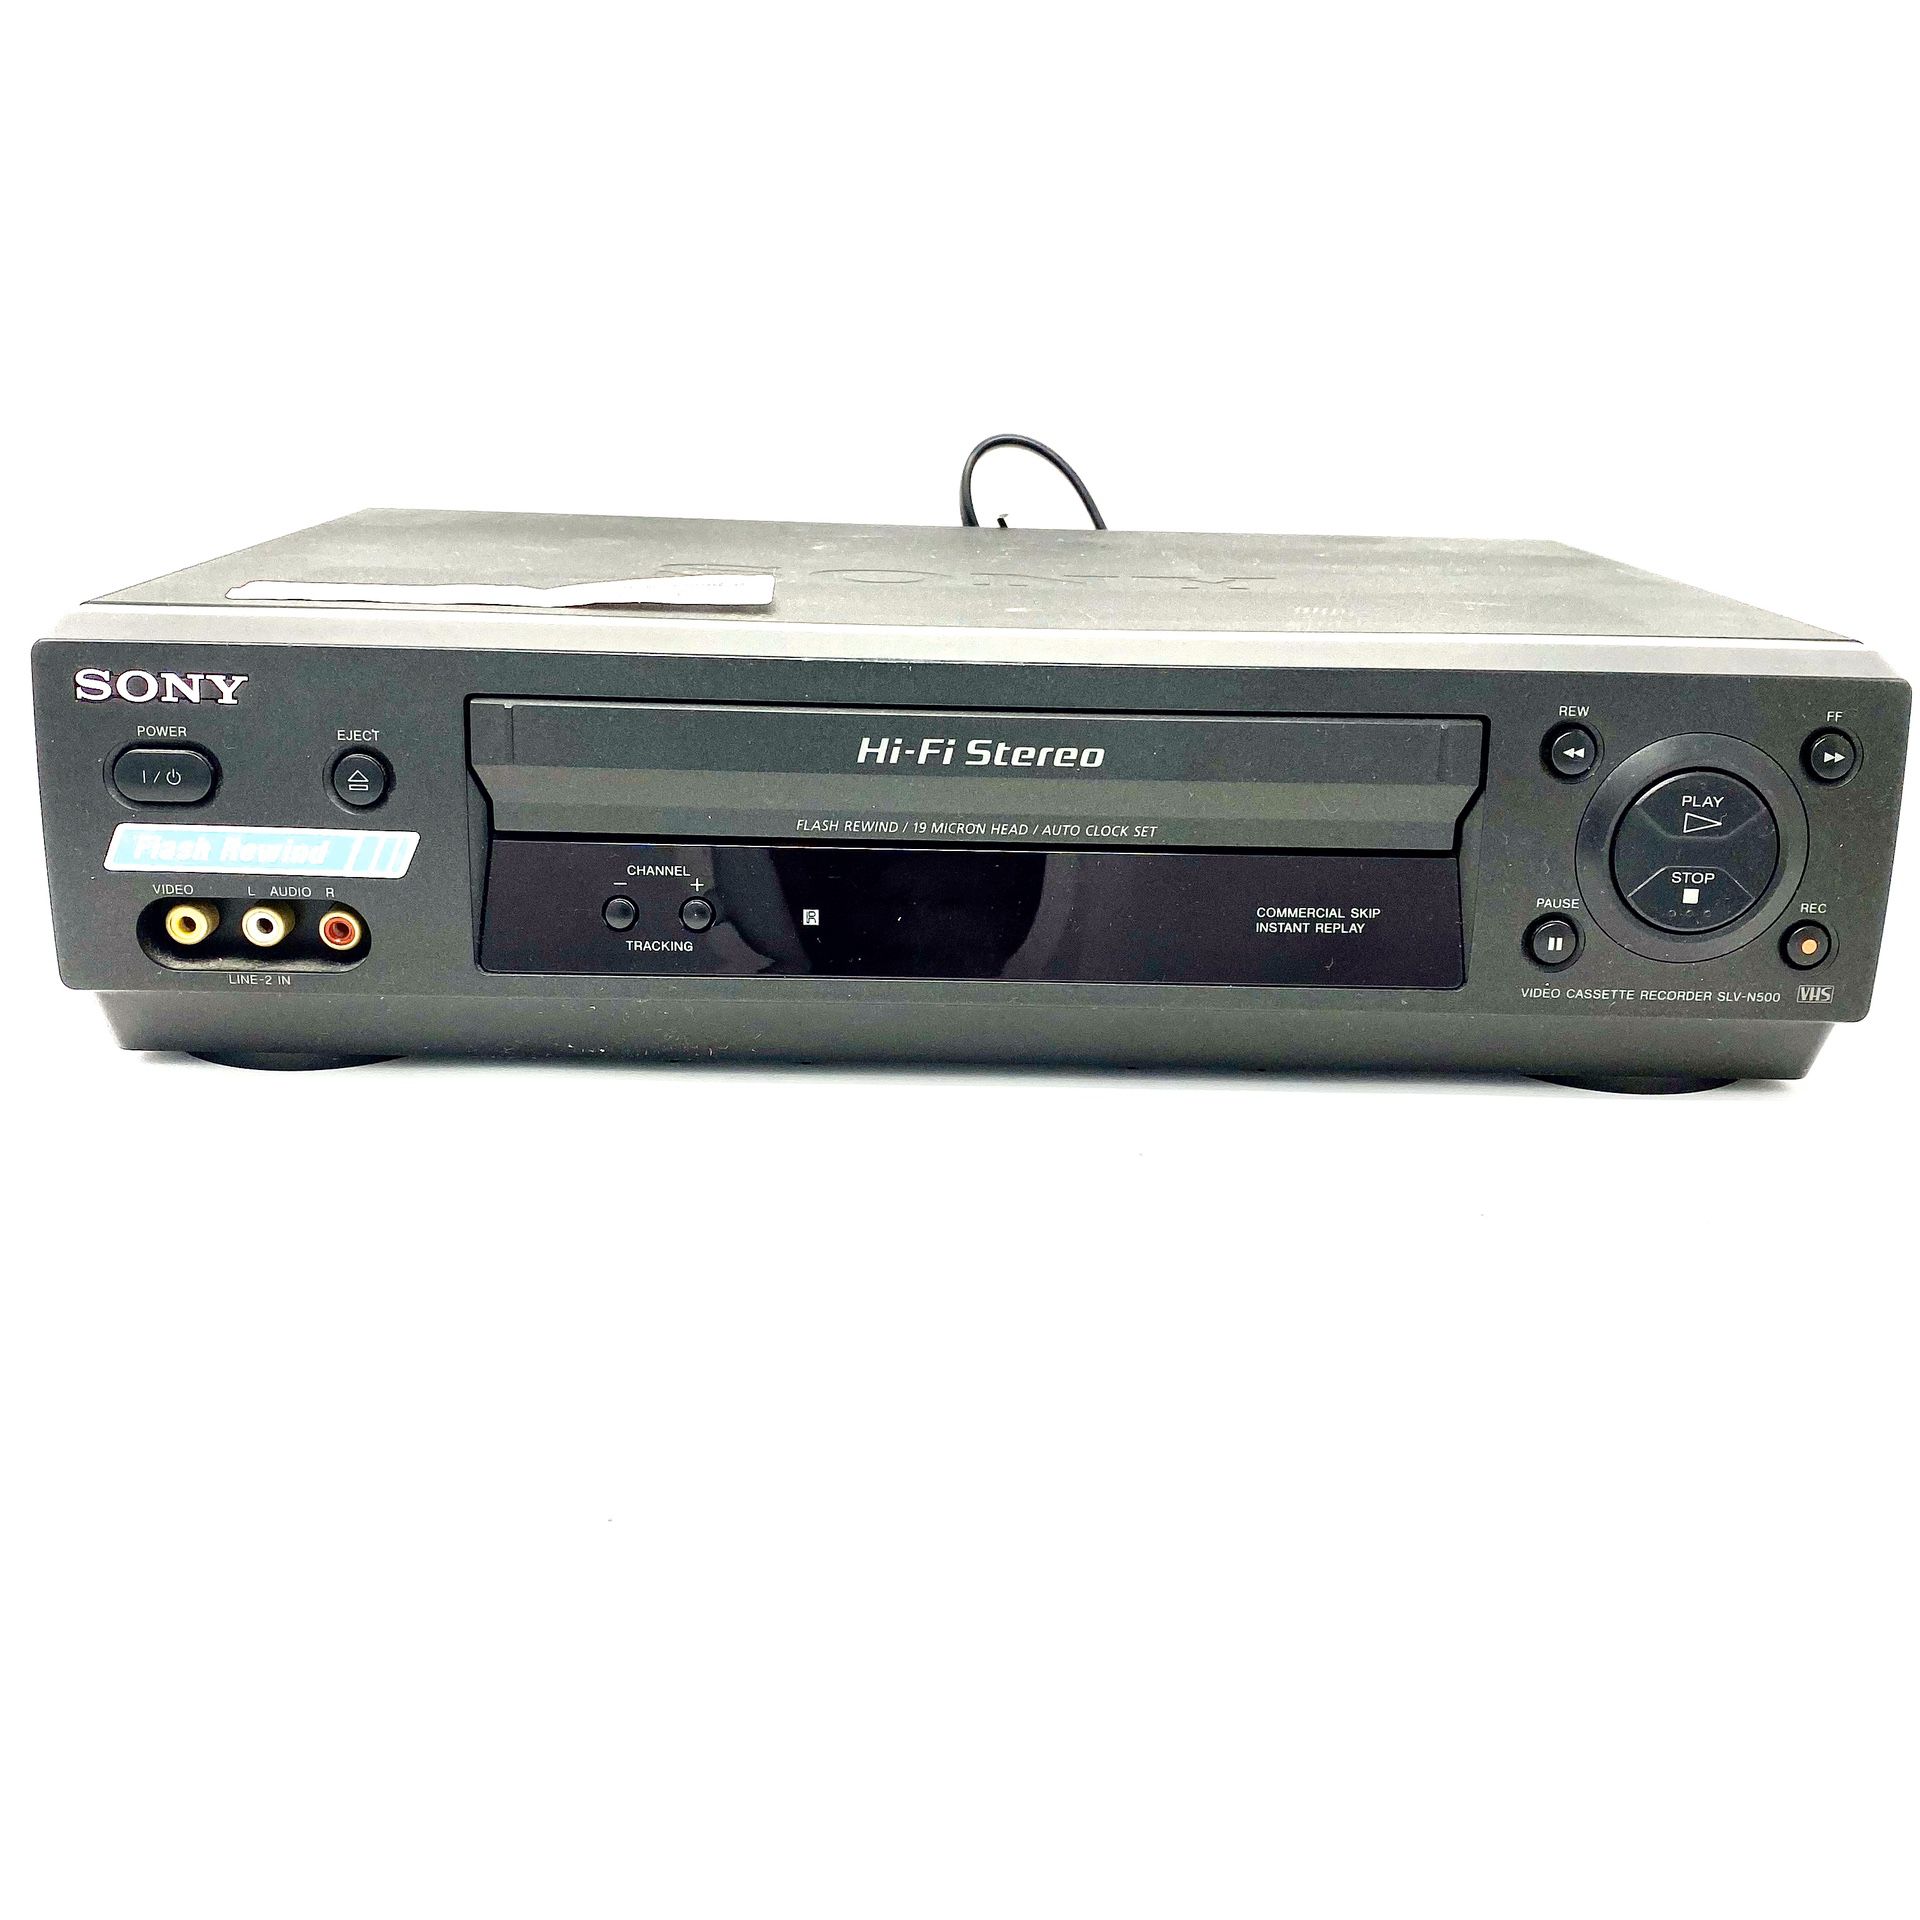 Sony SLV-N500 VHS VCR Hi-Fi Stereo 4Head Player Recorder - Tested (No Remote)